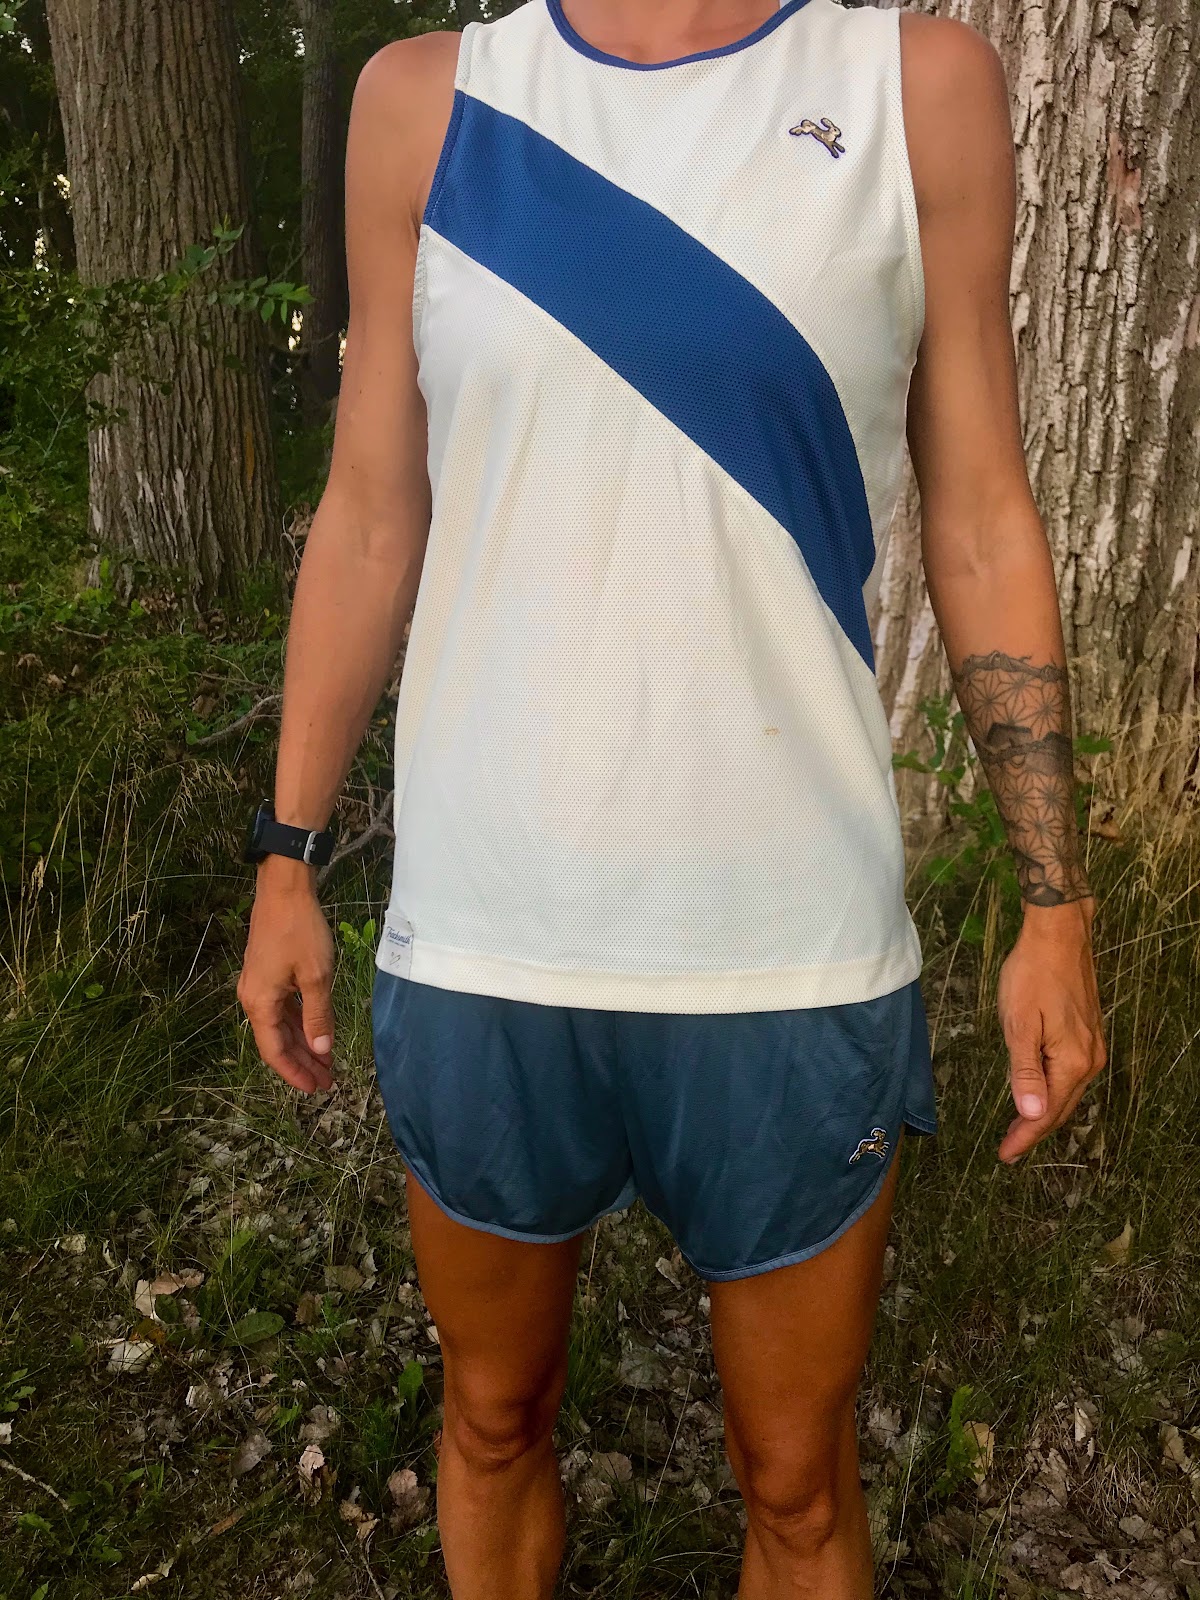 Road Trail Run: Tracksmith Multi Tester Men's and Women's Apparel Review:  Front of the Running Class in Style and Performance